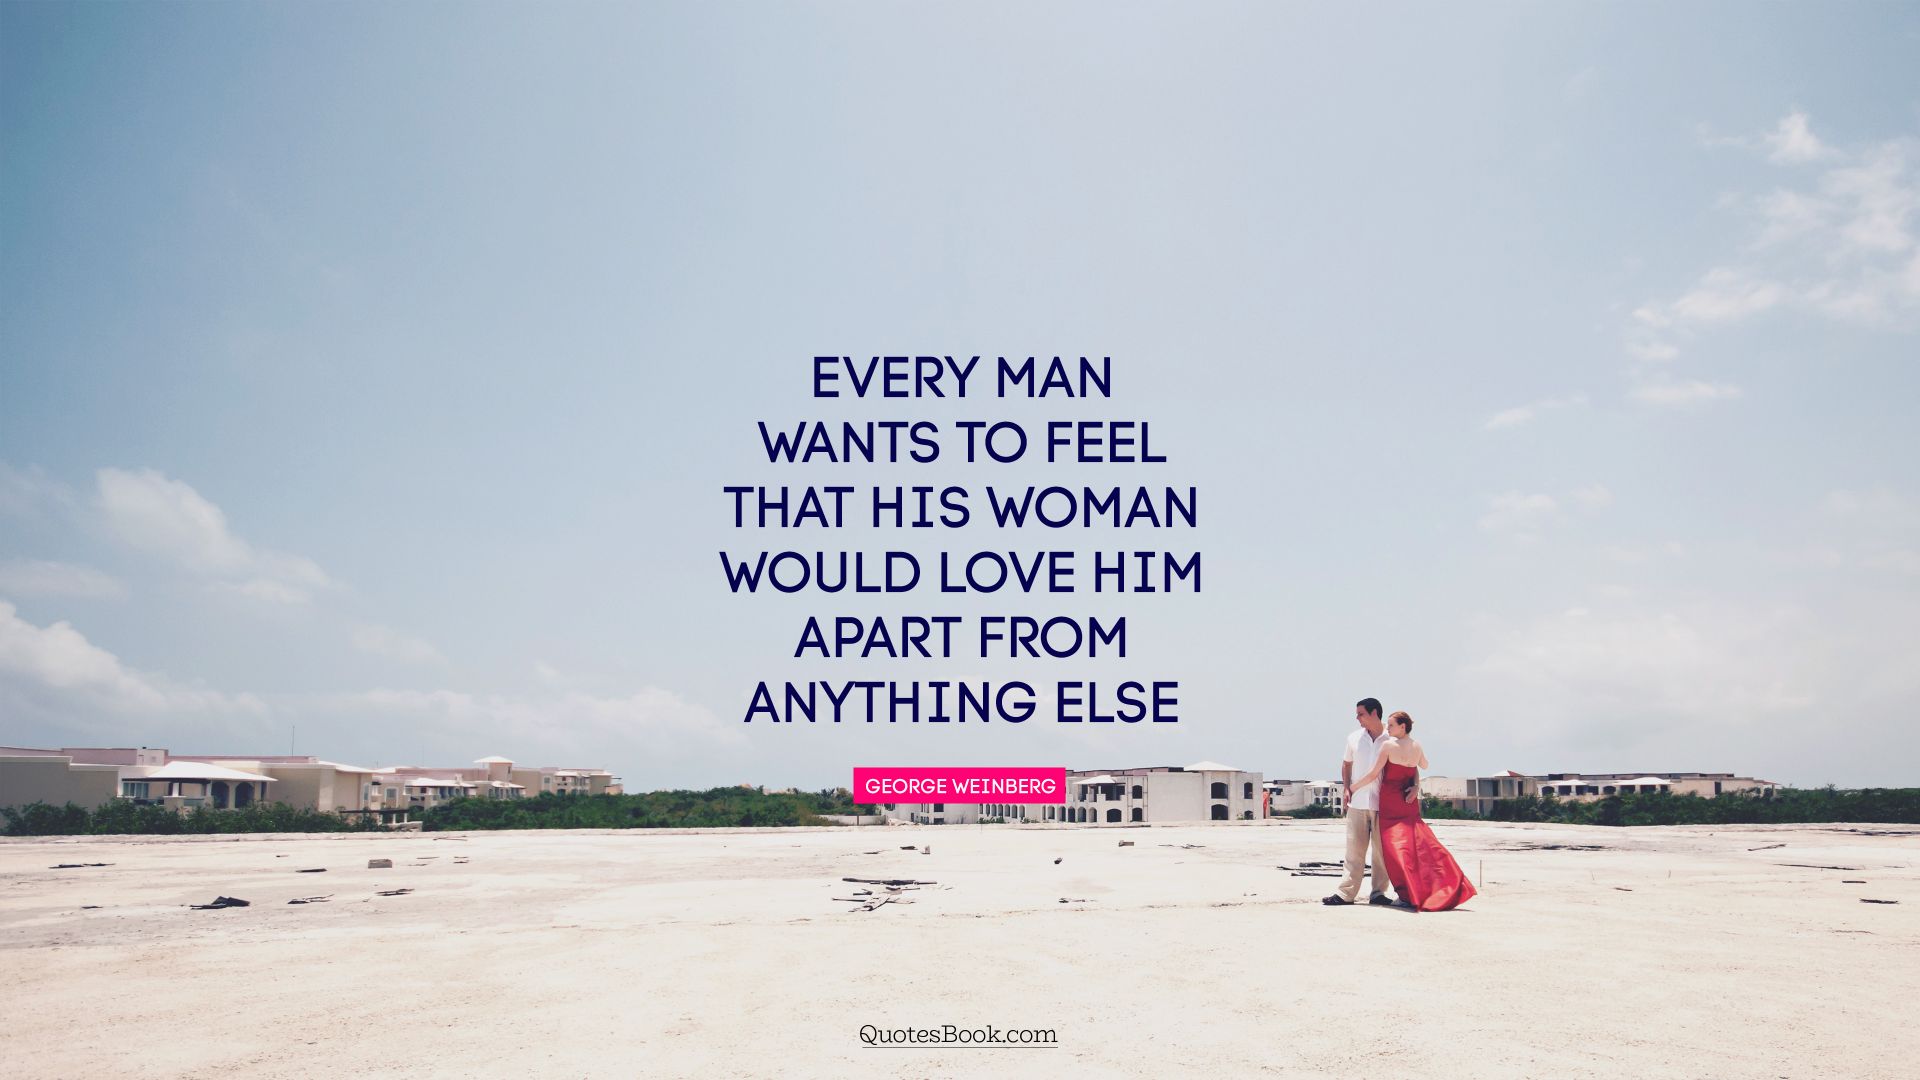 Every man wants to feel that his woman would love him apart from anything else. - Quote by George Weinberg